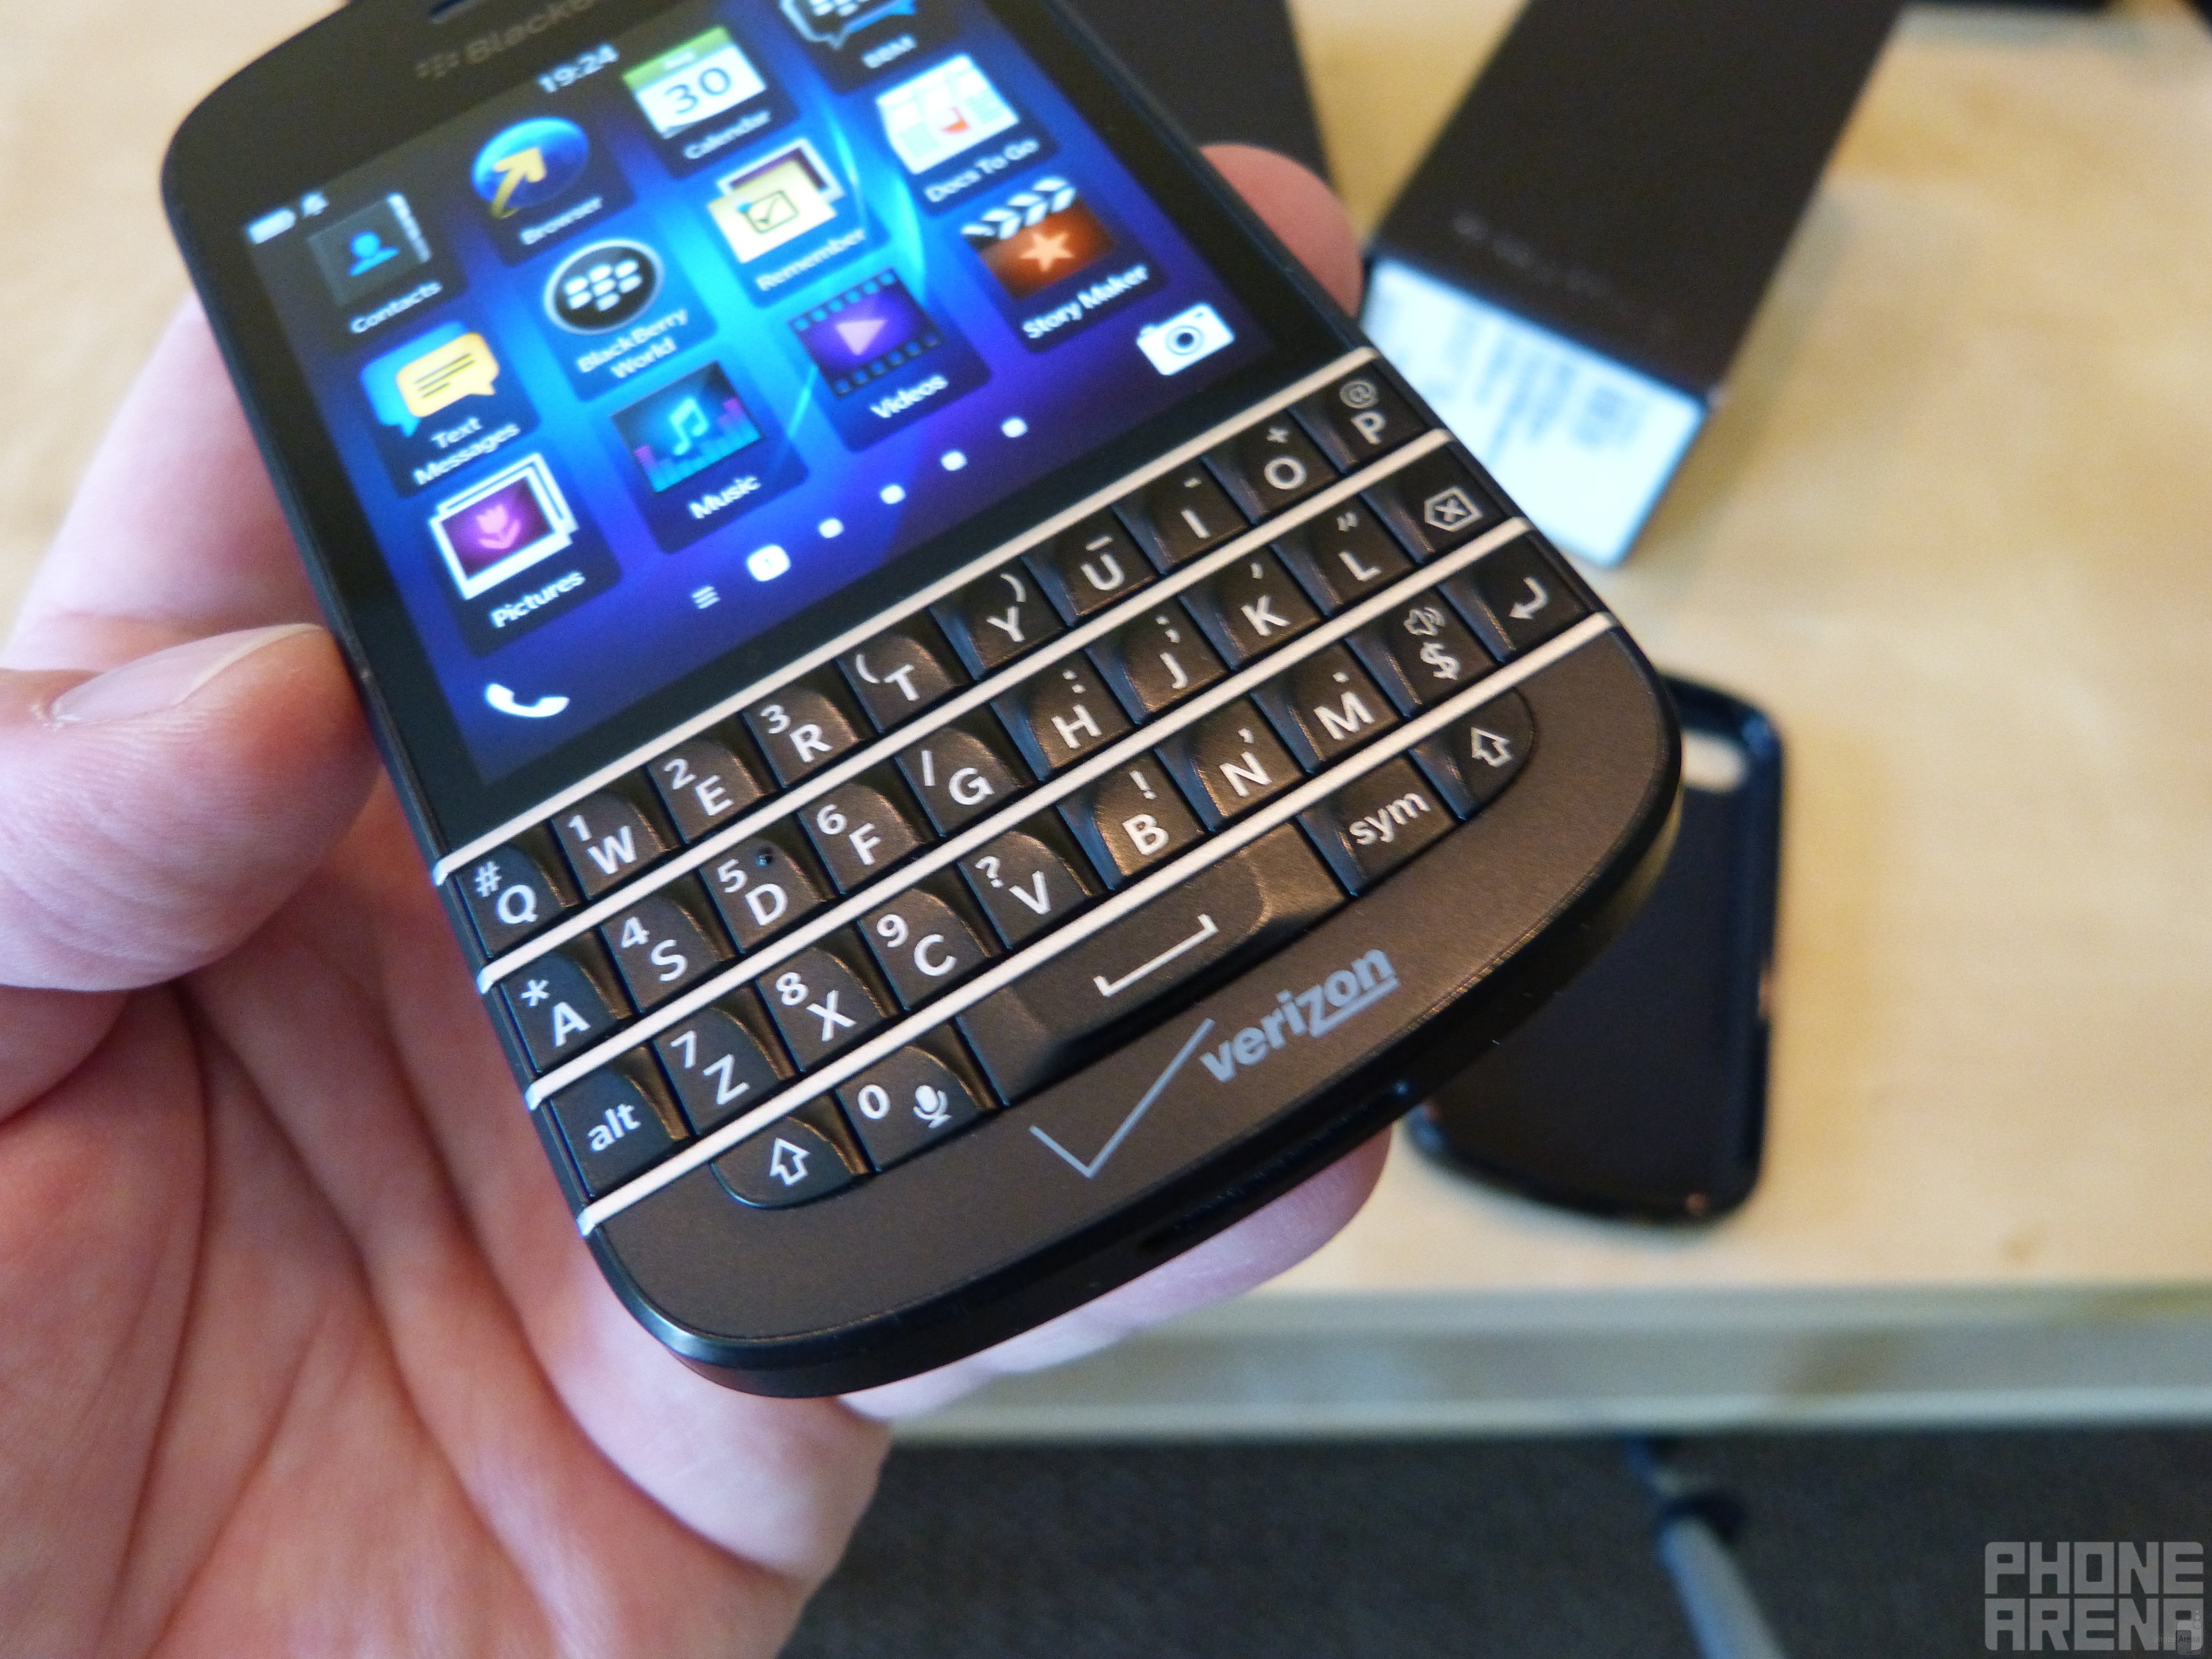 The essence of BlackBerry has always been its top-shelf QWERTY keyboards, great for hammering out emails or chatting on BlackBerry Messenger. - Is being a “niche player” feasible for BlackBerry?